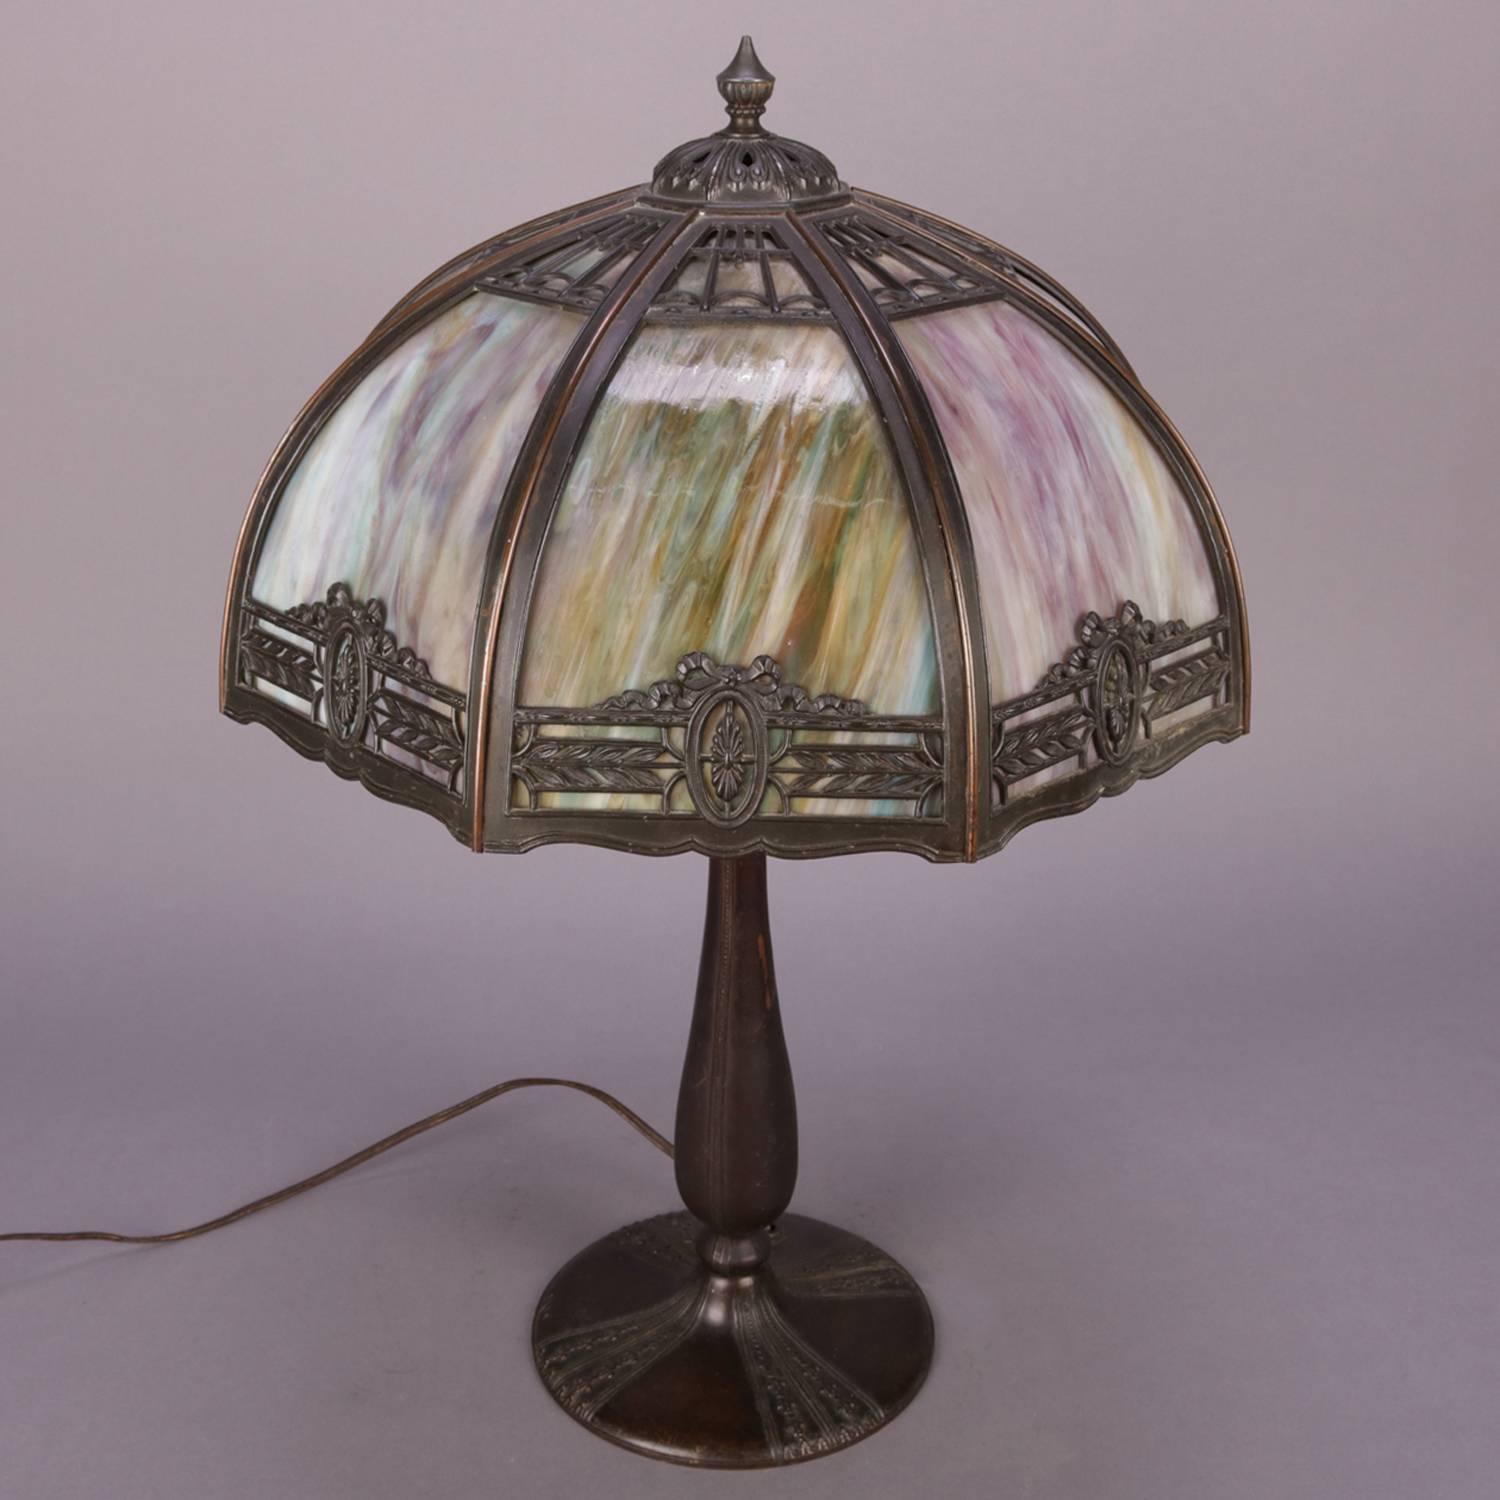 Antique Bradley & Hubbard School table lamp features eight panel pierced filigree shade with foliate border containing patera medallions central to each panel and housing curved slag glass panes, cast base is tulip form with dual pull chain light